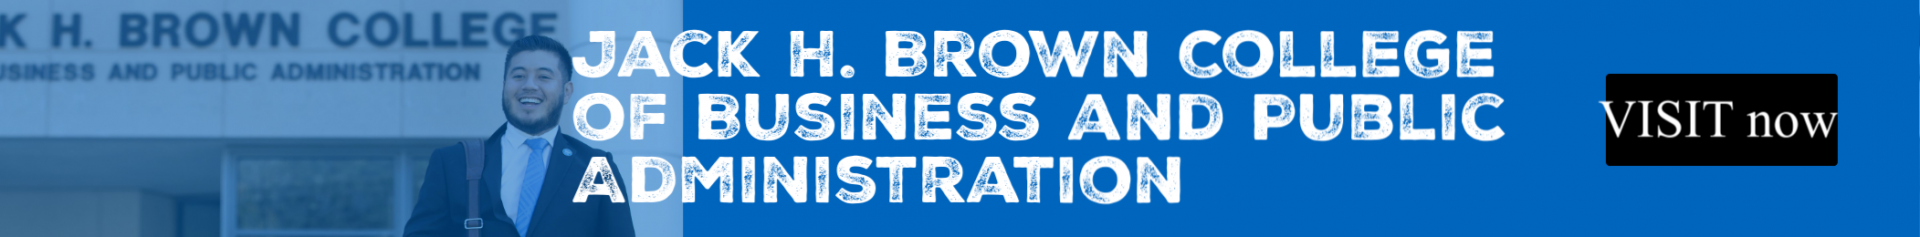 Jack H. Brown College of Business and Public Administration